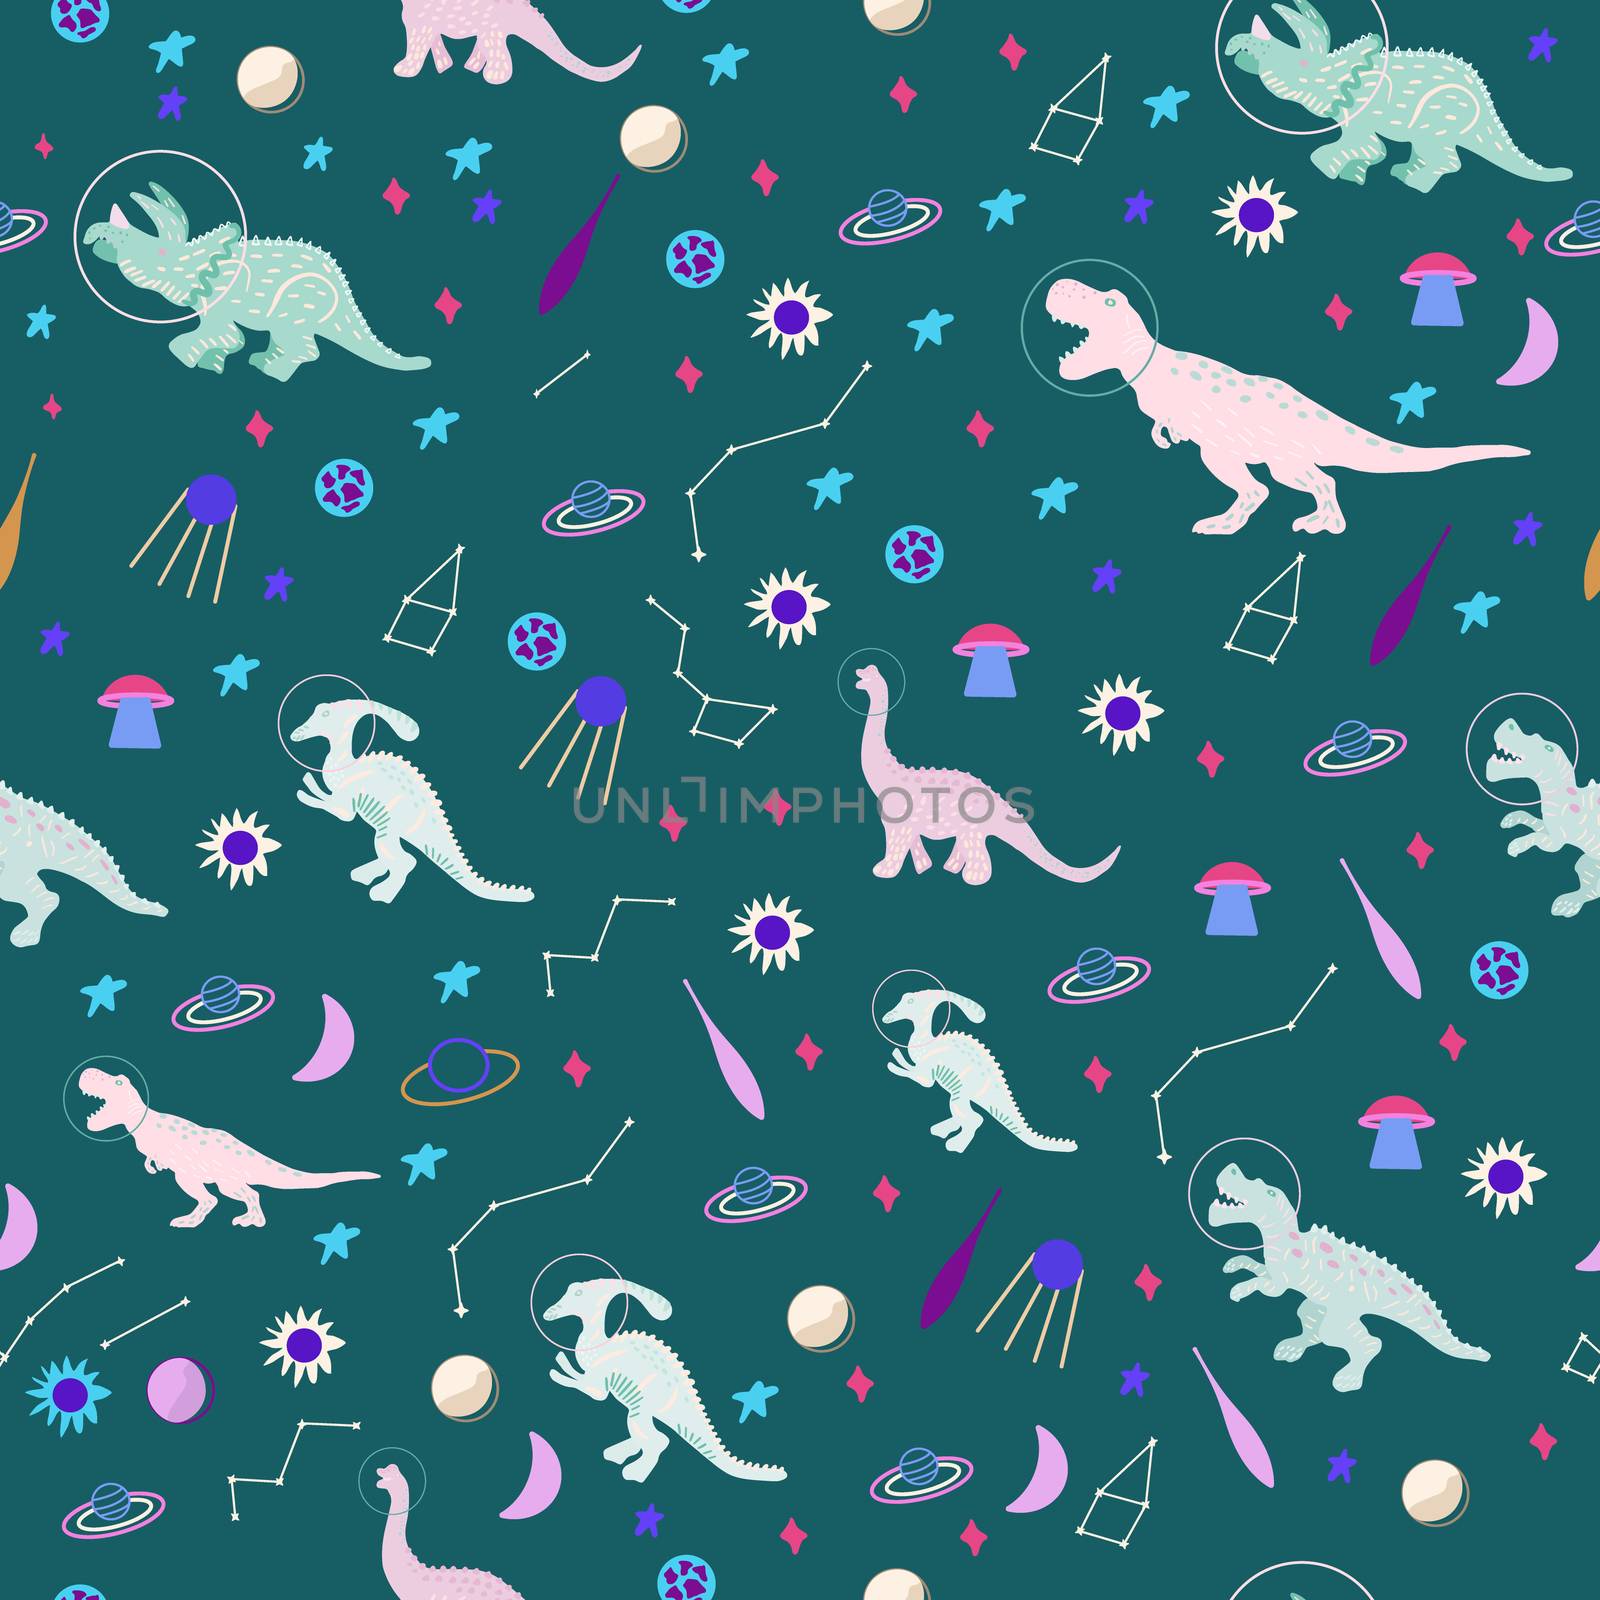 Space dino seamless pattern on teal. Cute wild galaxy monster endless design. Joyous reptile astronaut and planets decor for textile, paper, web, wallpaper. Vector illustration in flat cartoon style.